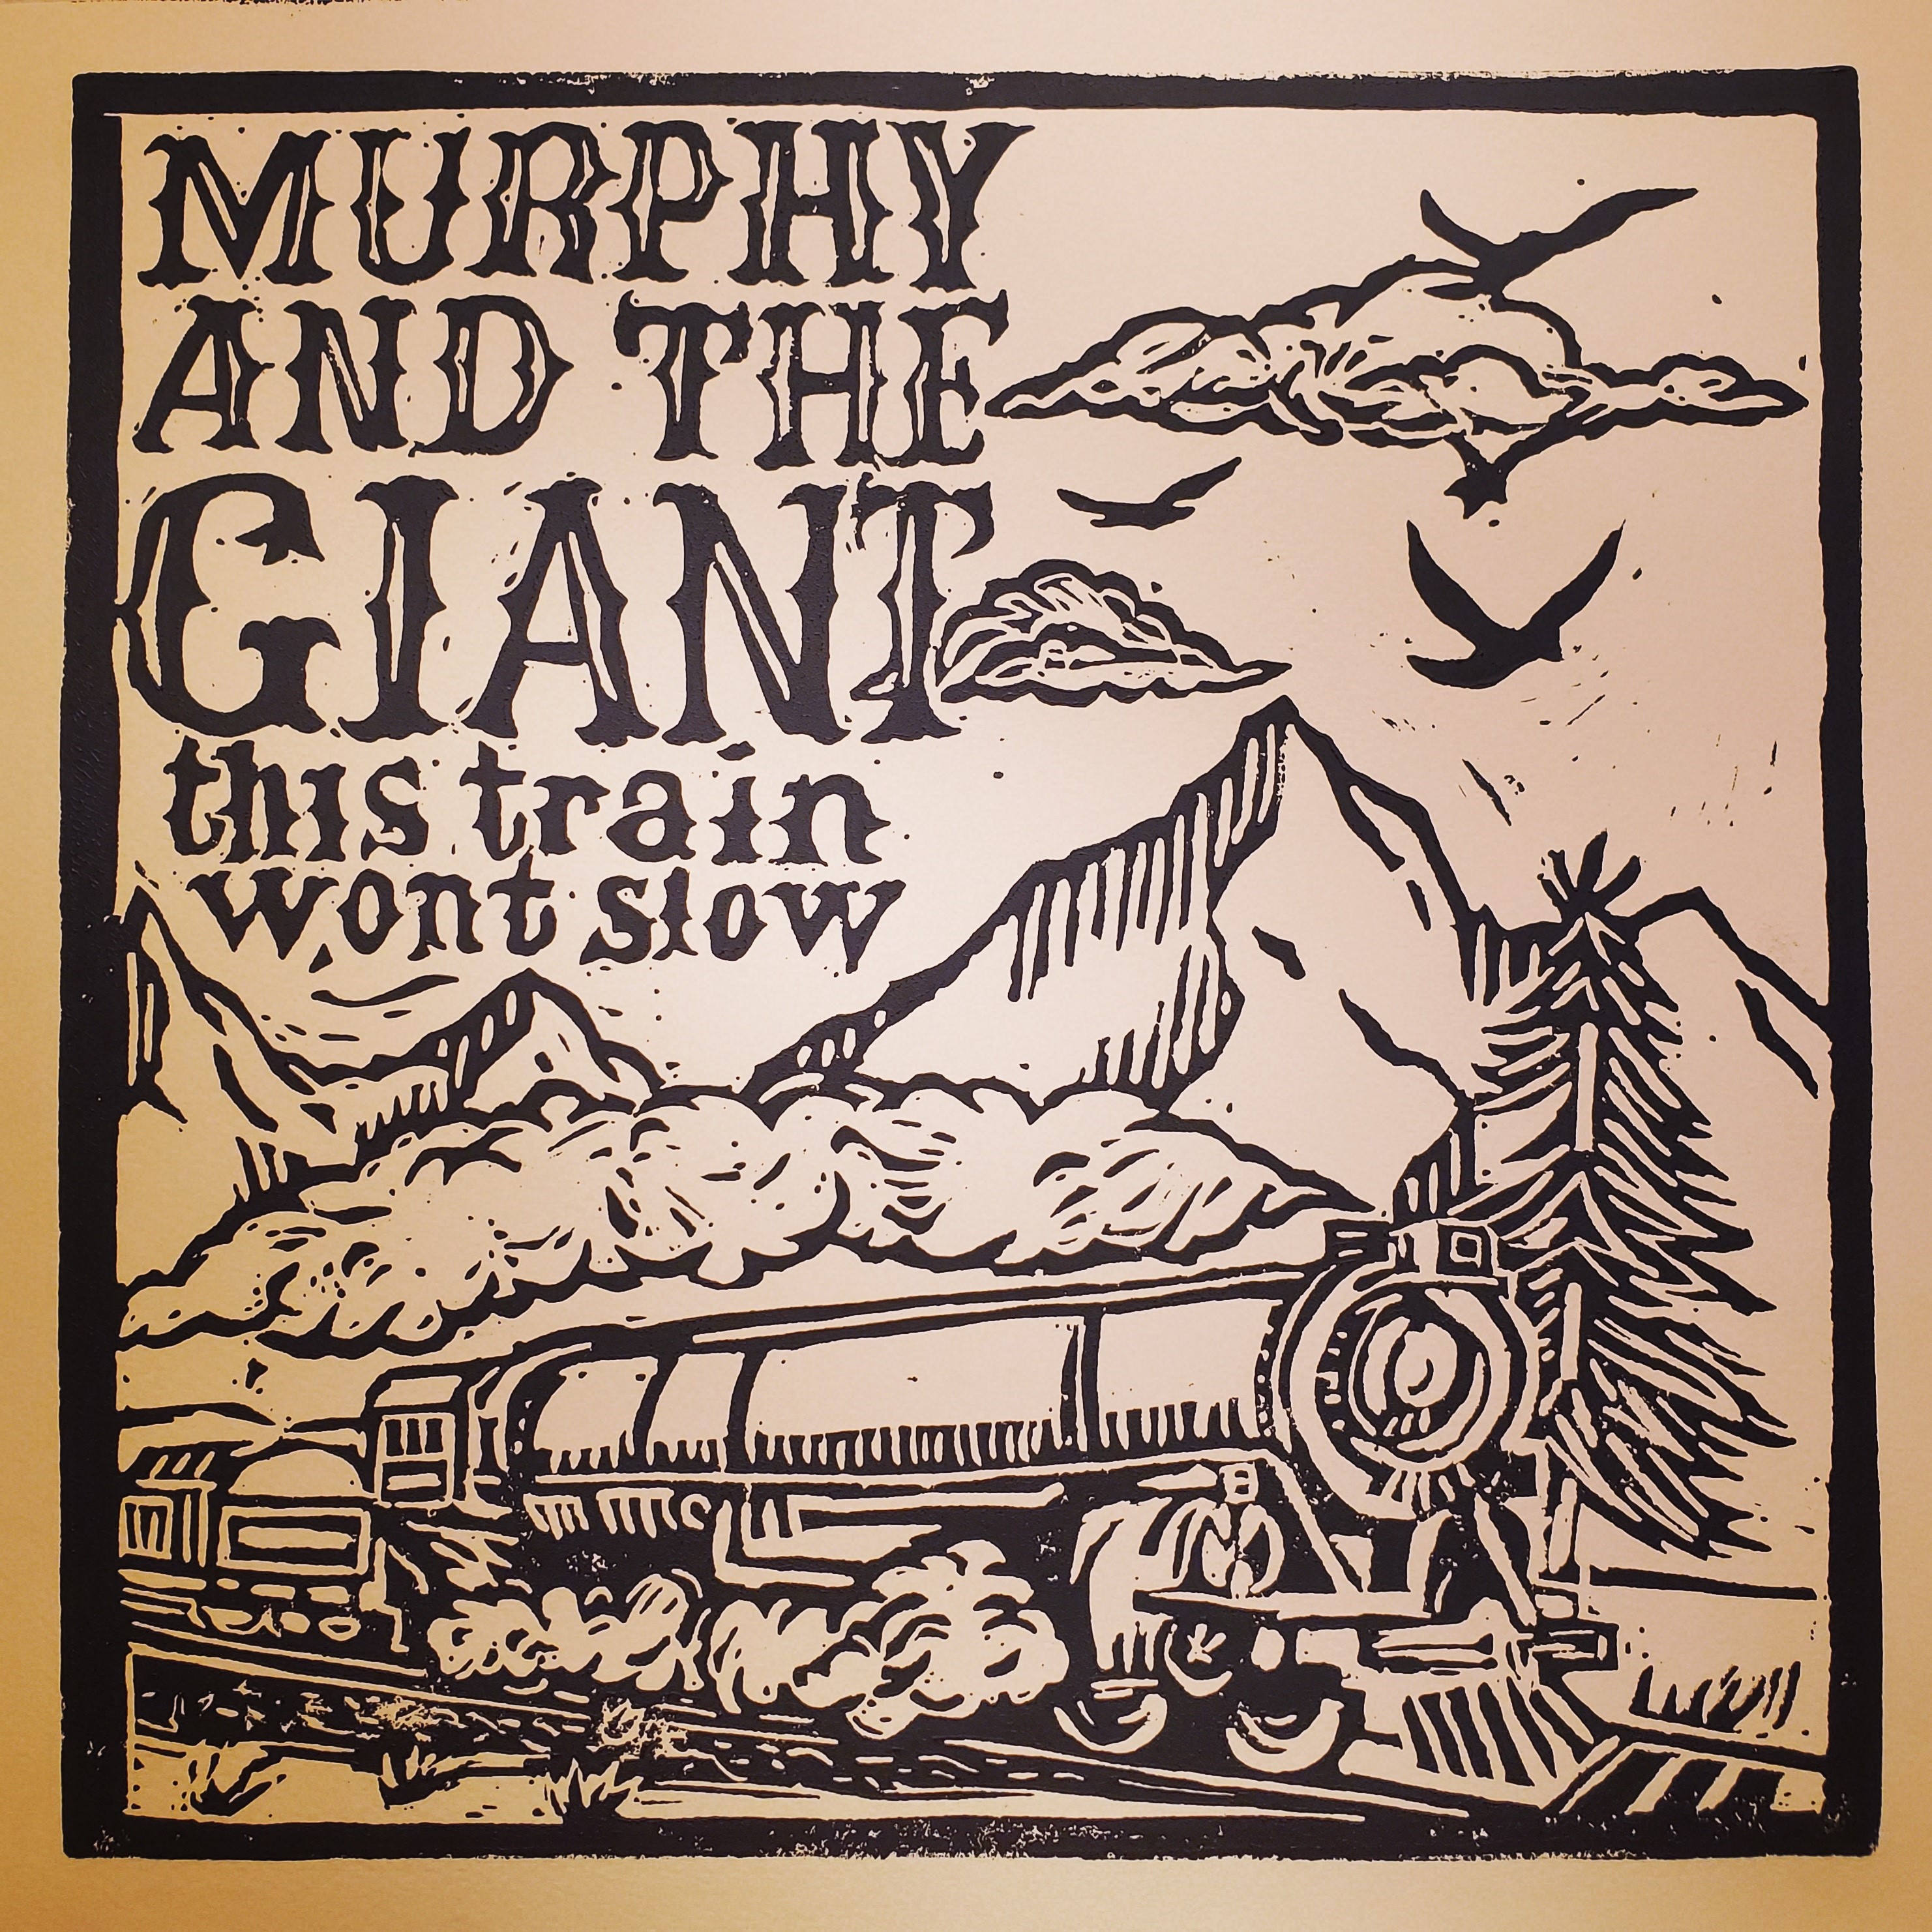 Murphy and the Giant